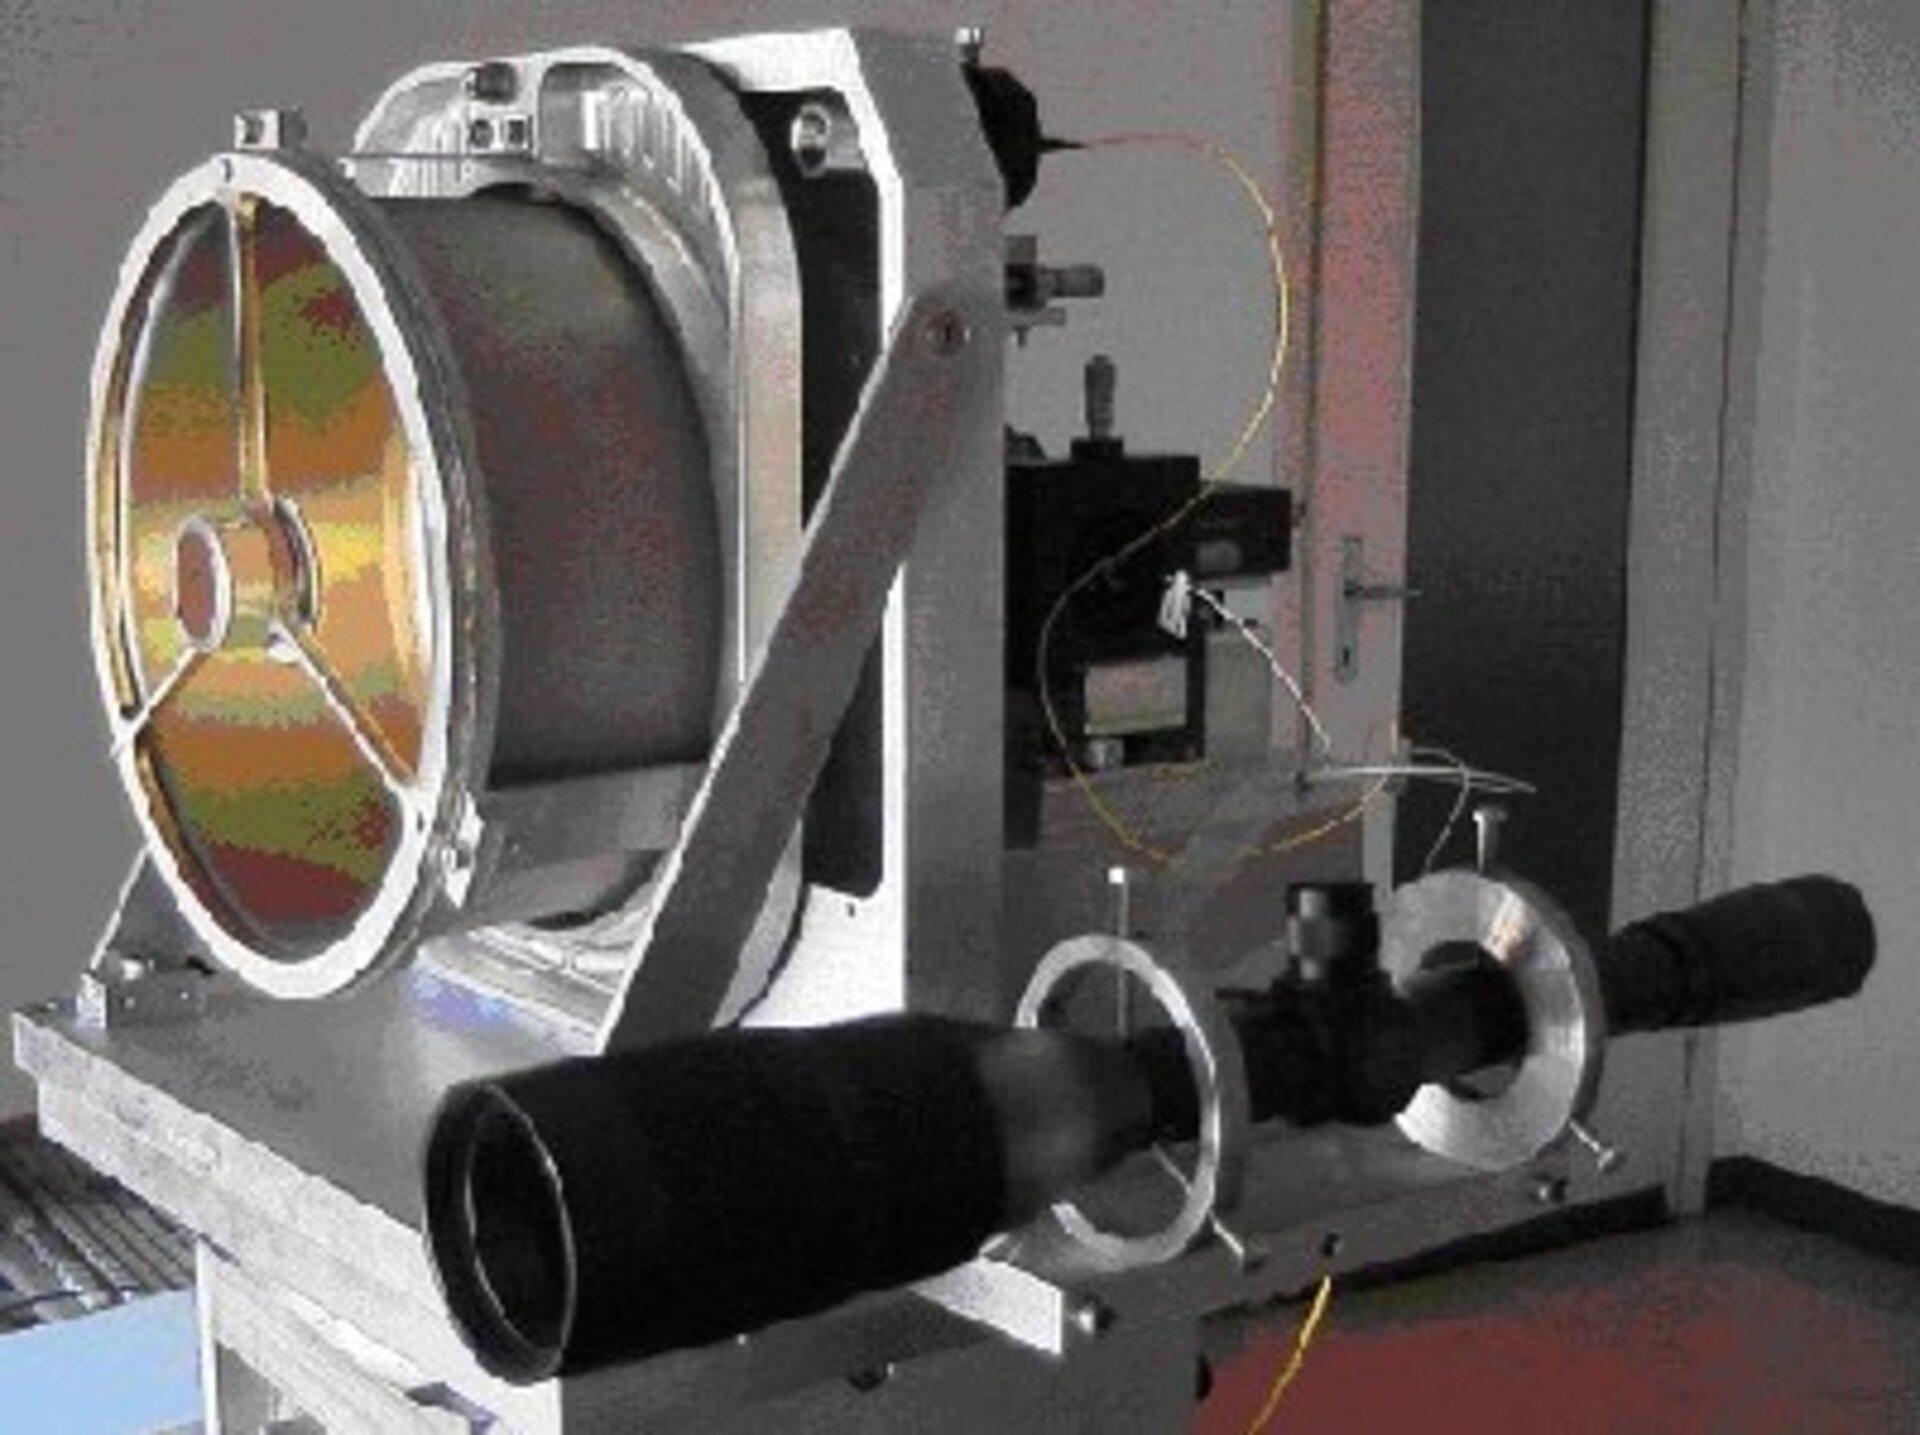 Terrestrial optical link with space technology from ESA's XMM-Newton's X-ray telescope